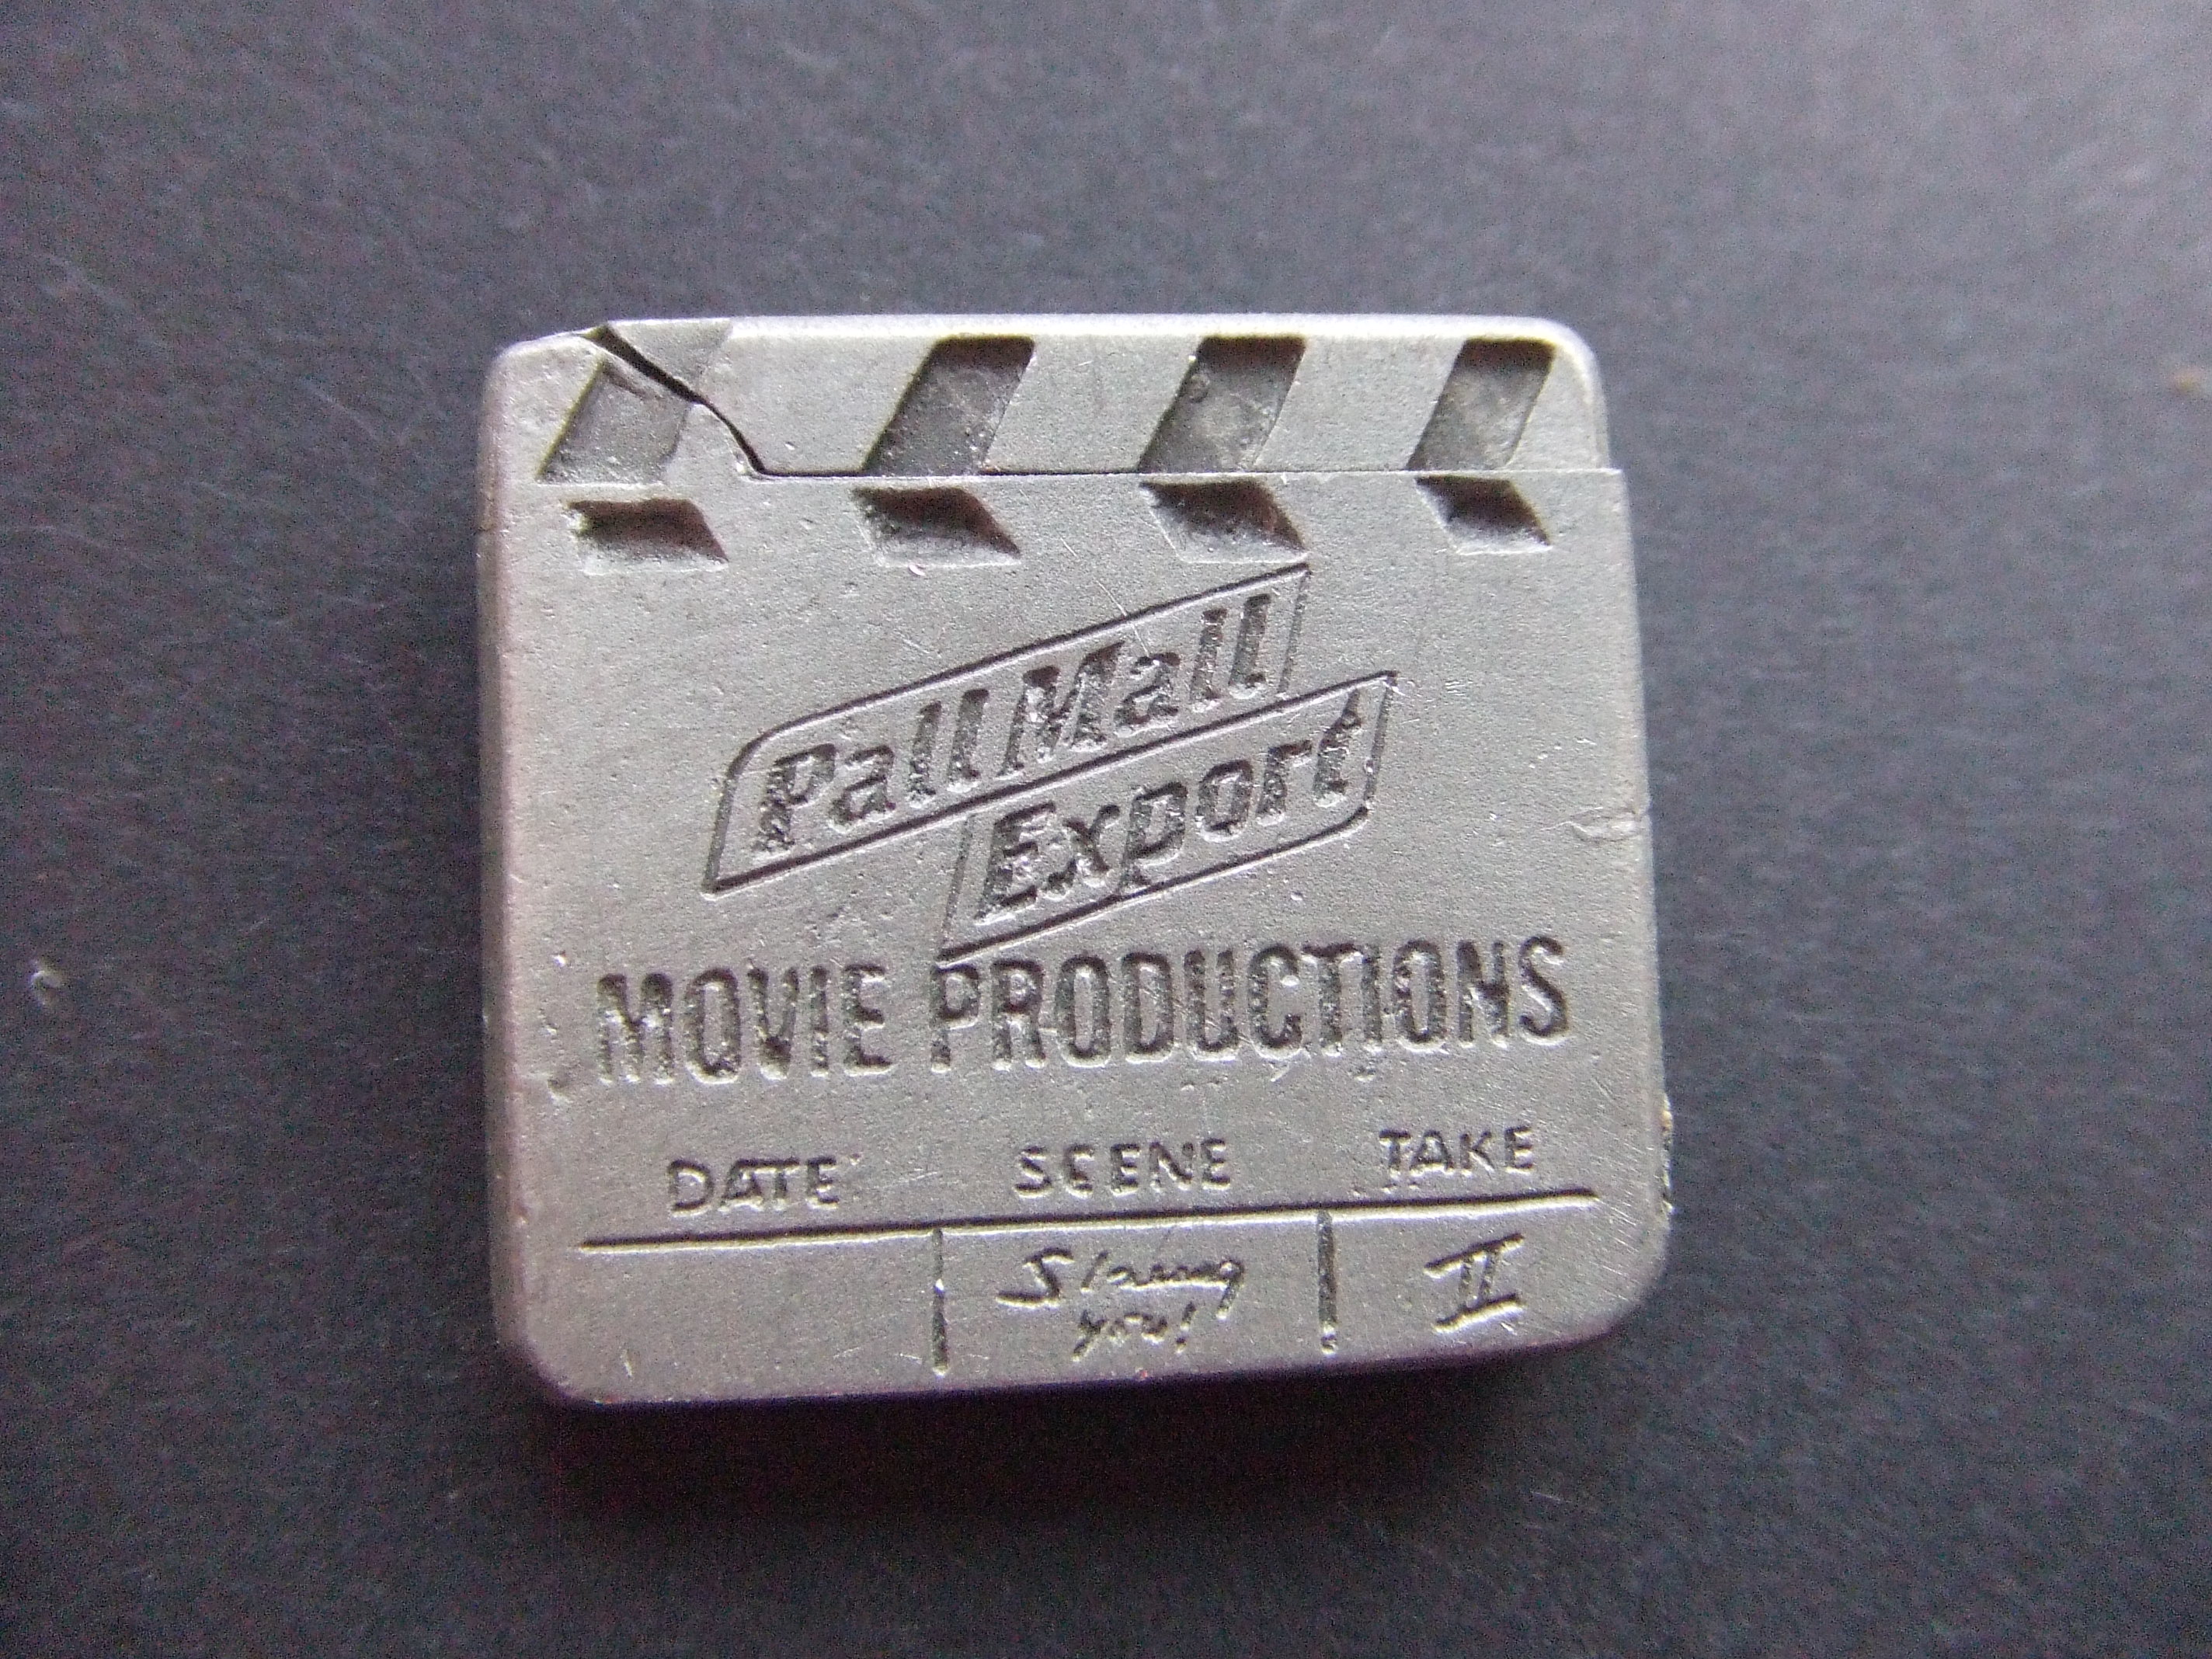 Pall Mall Export movie productions